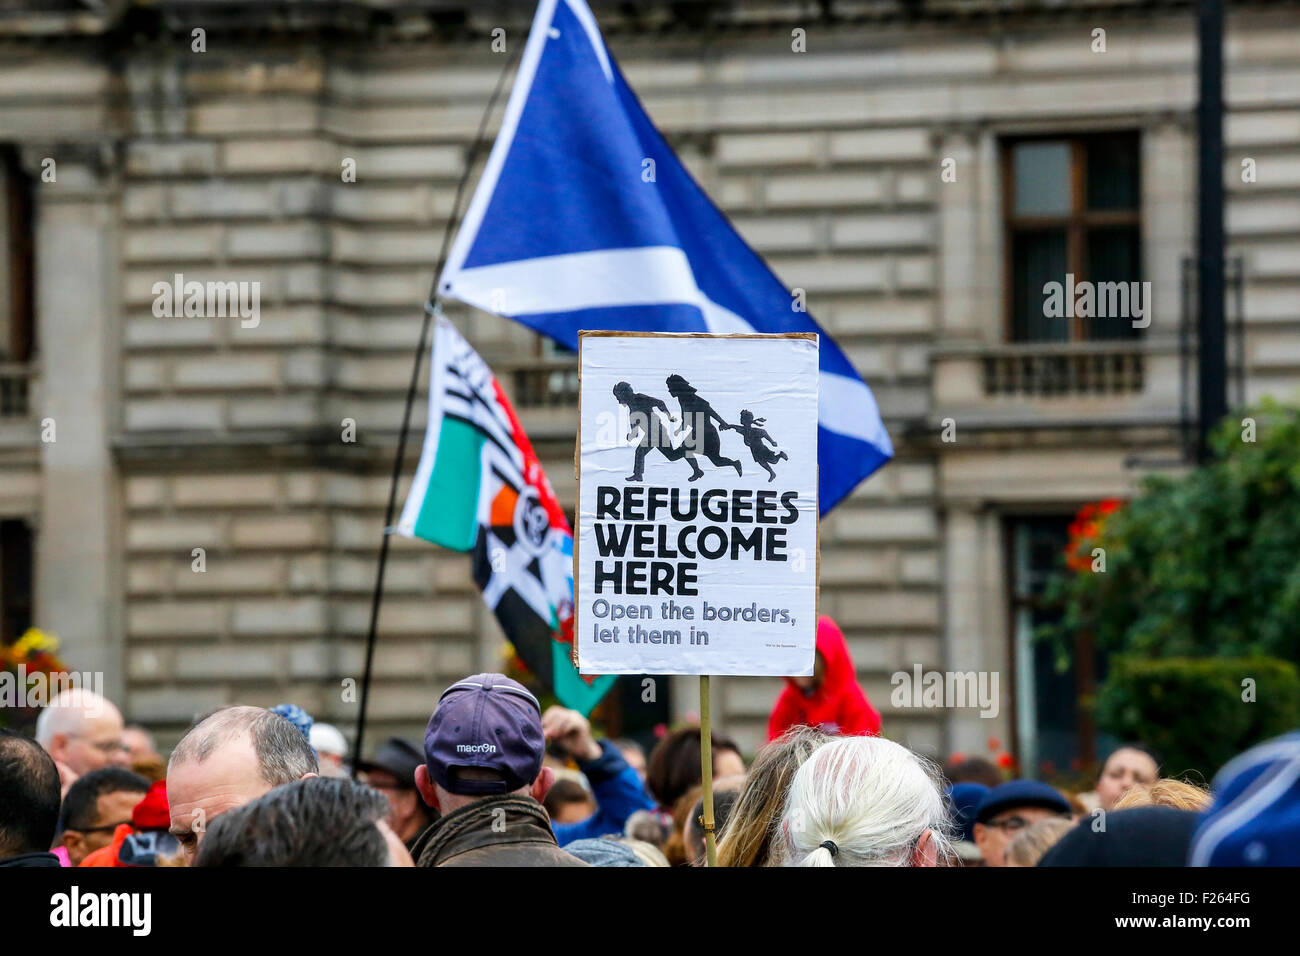 Glasgow, Scotland, UK. 12th Sept, 2015. Despite the heavy rain, about 2000 people attended a candlelight vigil in George Square, Glasgow showing support for the Syrian refugees. Recently Glasgow Council who already provides homes for 55 Syrians, announced  that it will take an additional 60 refugees. Frank McAveety, the newly appointed leader of Glasgow Council attended the rally. Credit:  Findlay/Alamy Live News Stock Photo